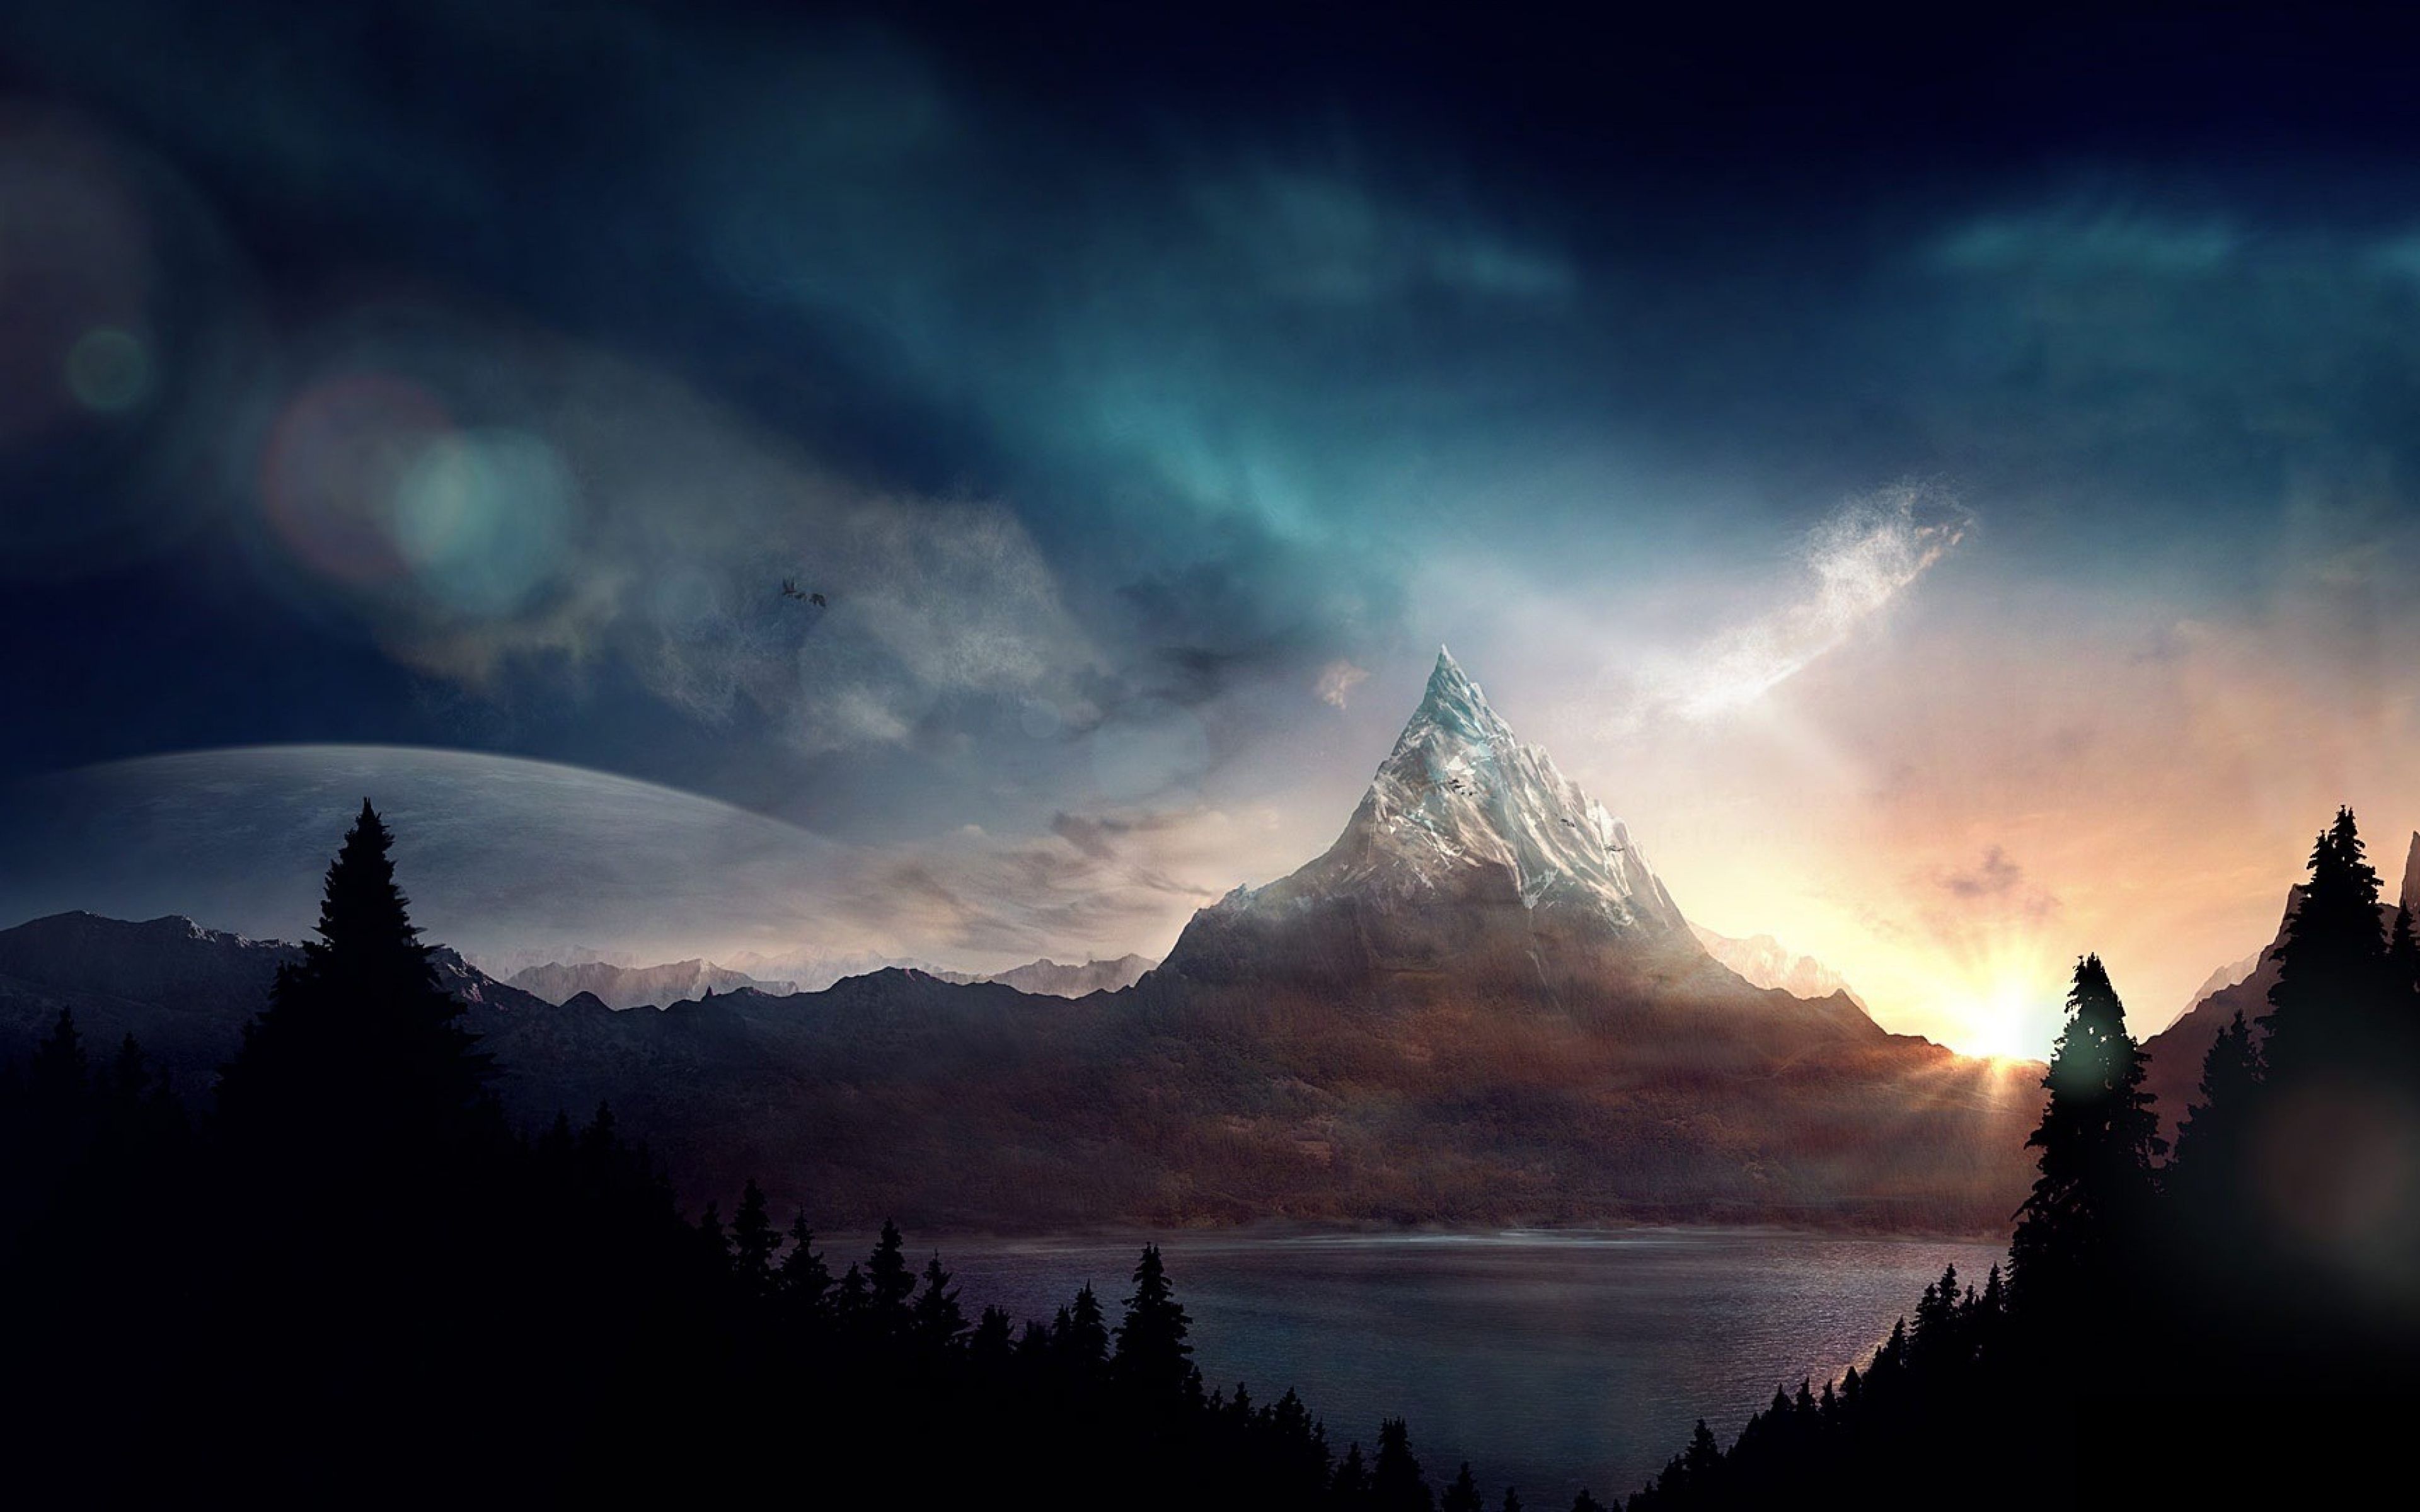 Lord Of The Rings Dual Monitor Wallpapers